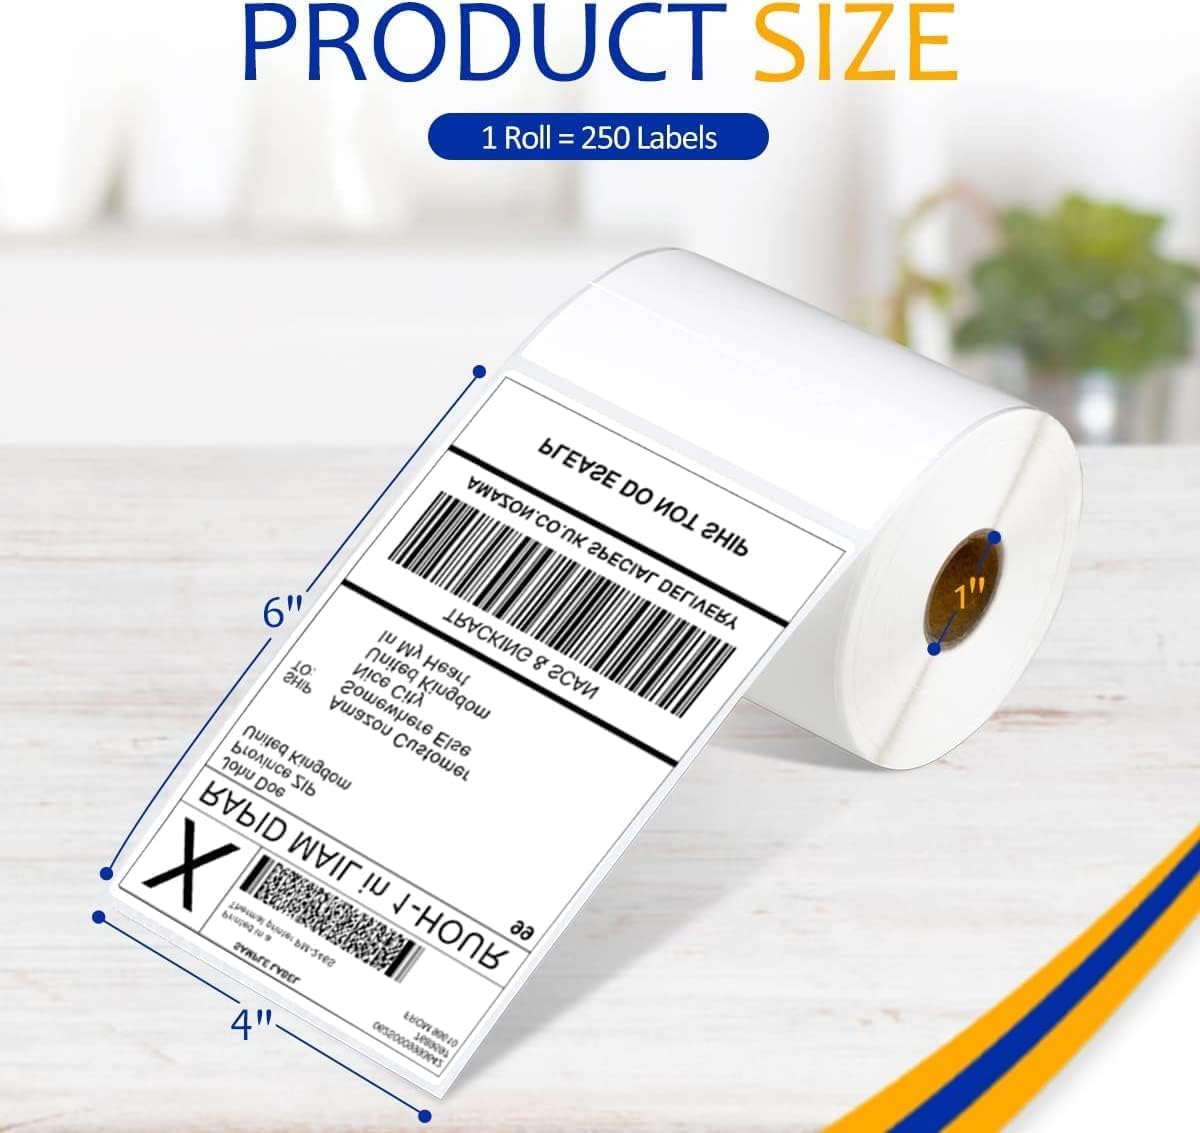 Itari 4x6 Thermal Labels - Shipping Labels, Label Stickers Thermal Paper with Perforated for Thermal Printer, Compatible with Etsy, Shopify, Ebay, Amazon, FedEx, 250 PCS/Roll, White